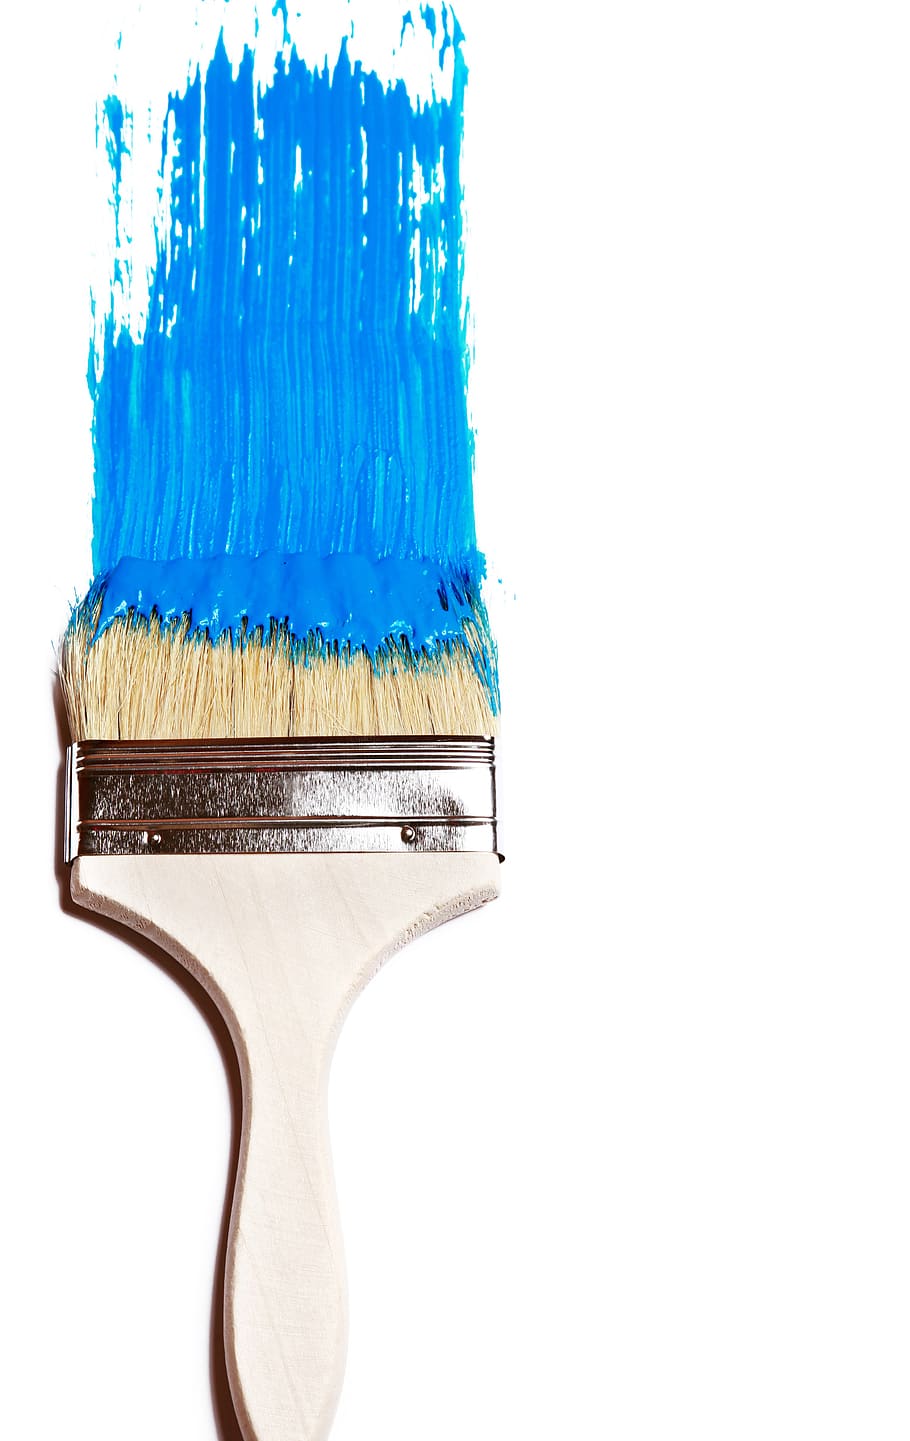 blue, paint, white, wall, painting, creative, creativity, painted, artistic, color